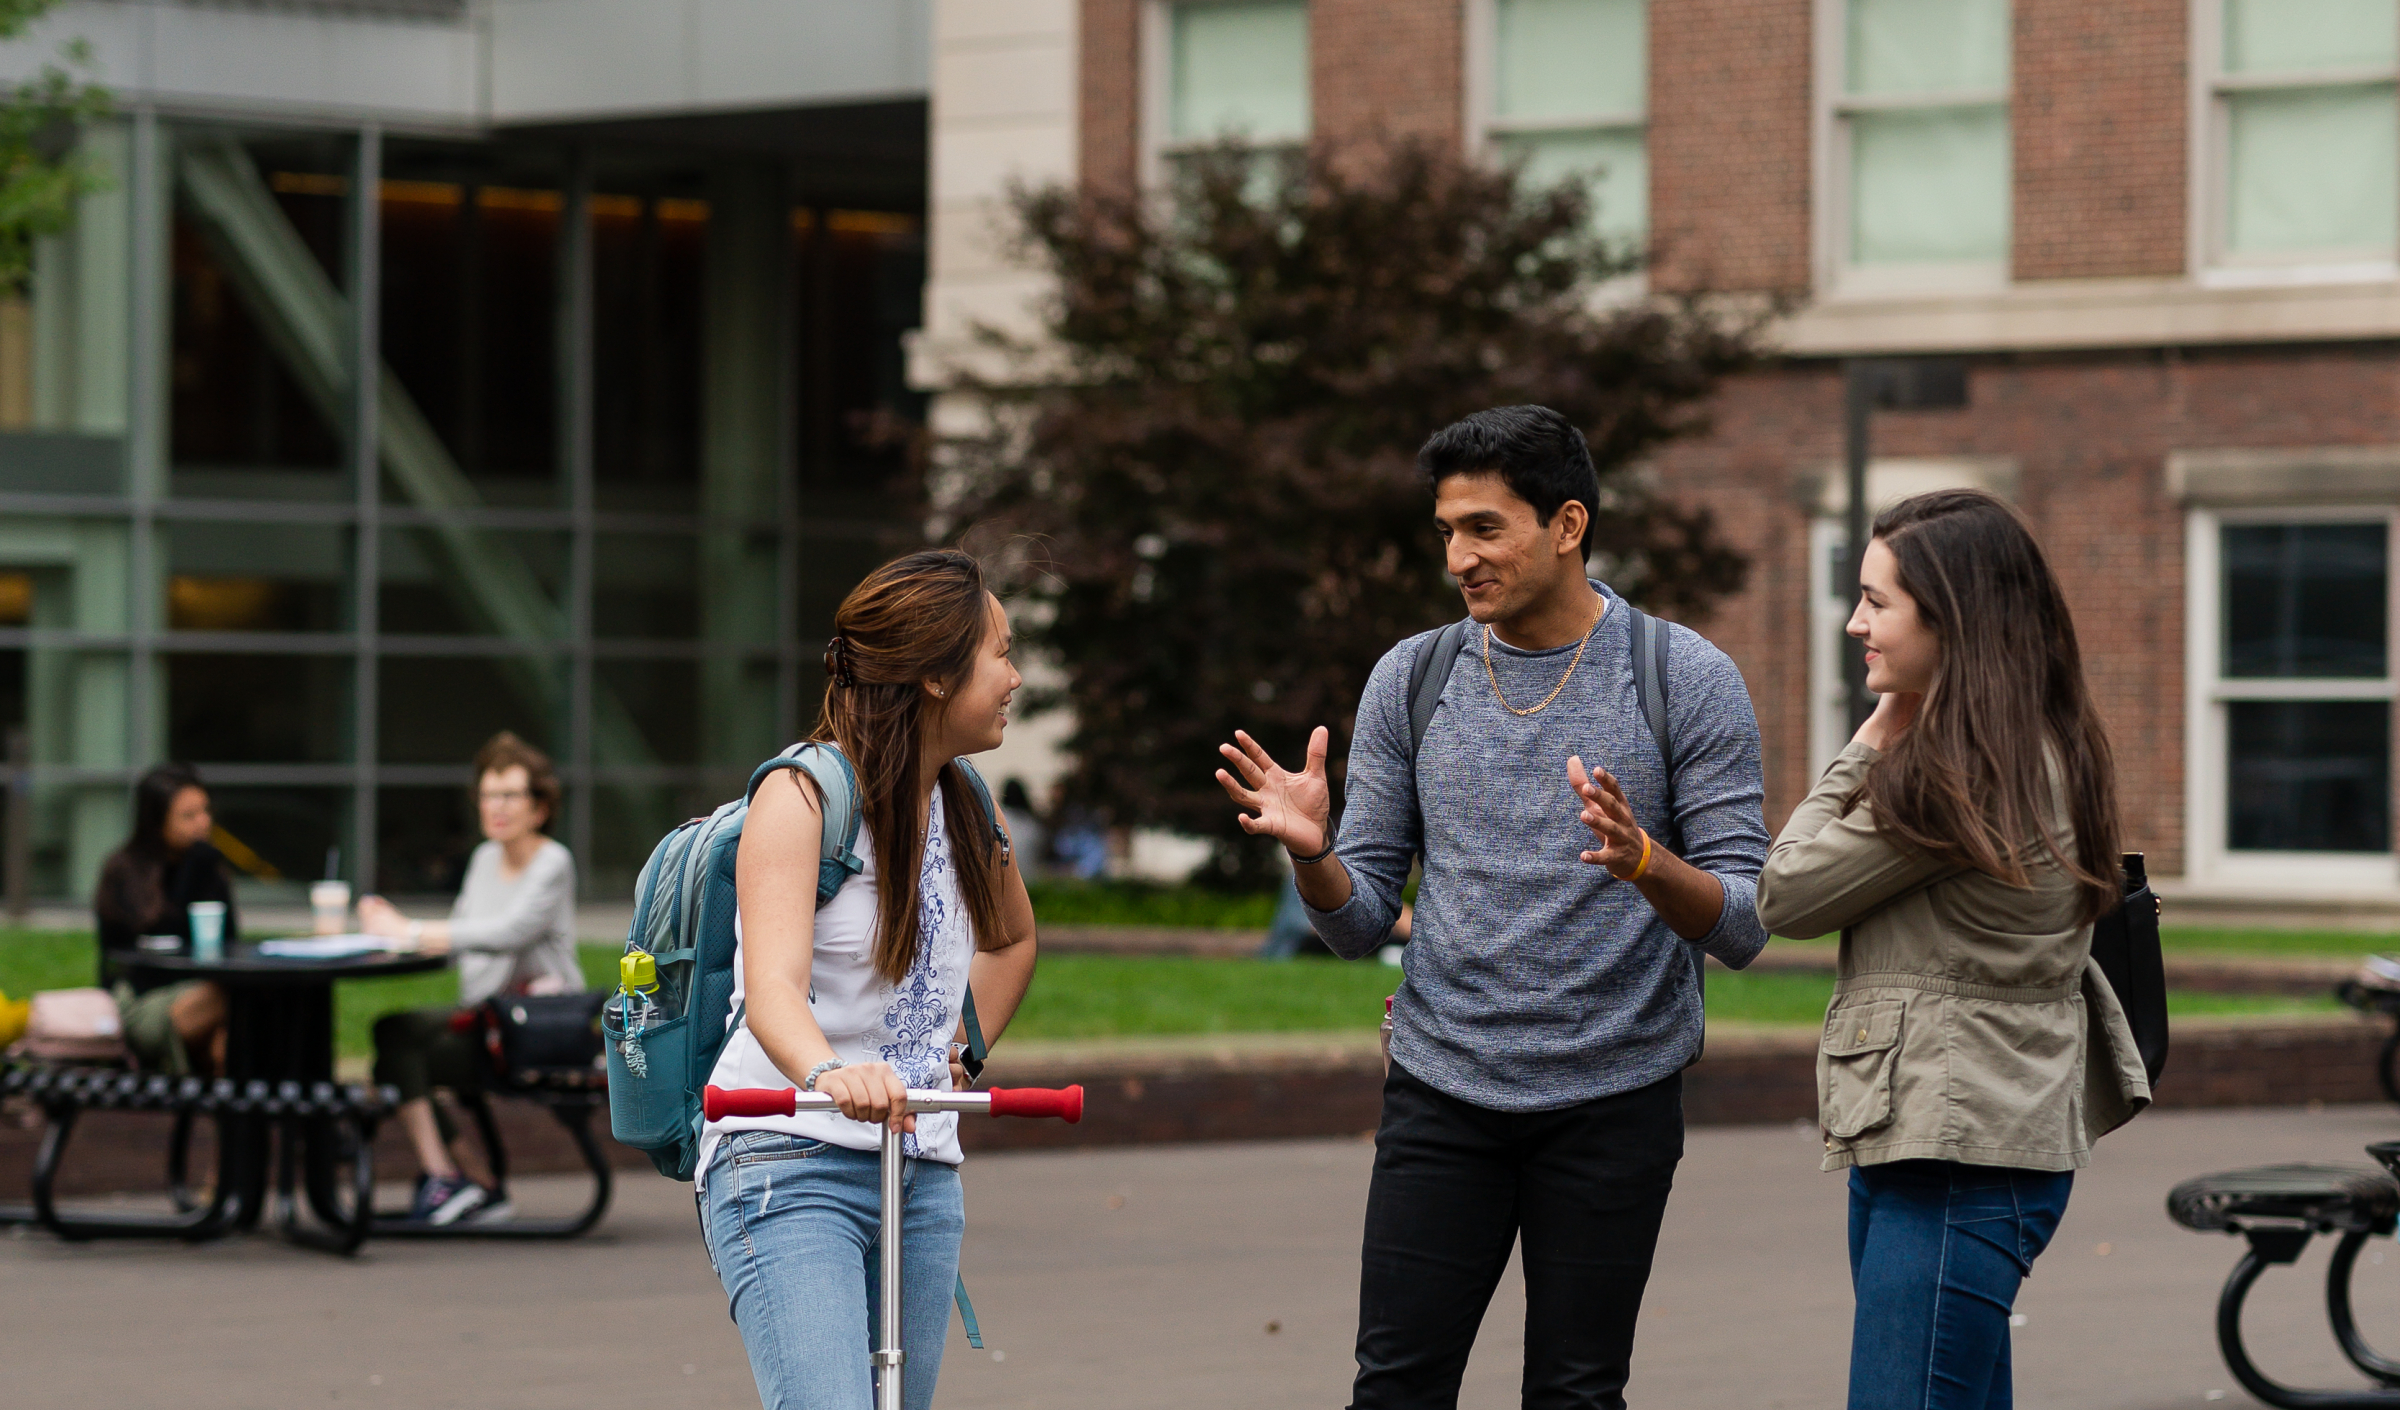 Three students stand together on campus and chat